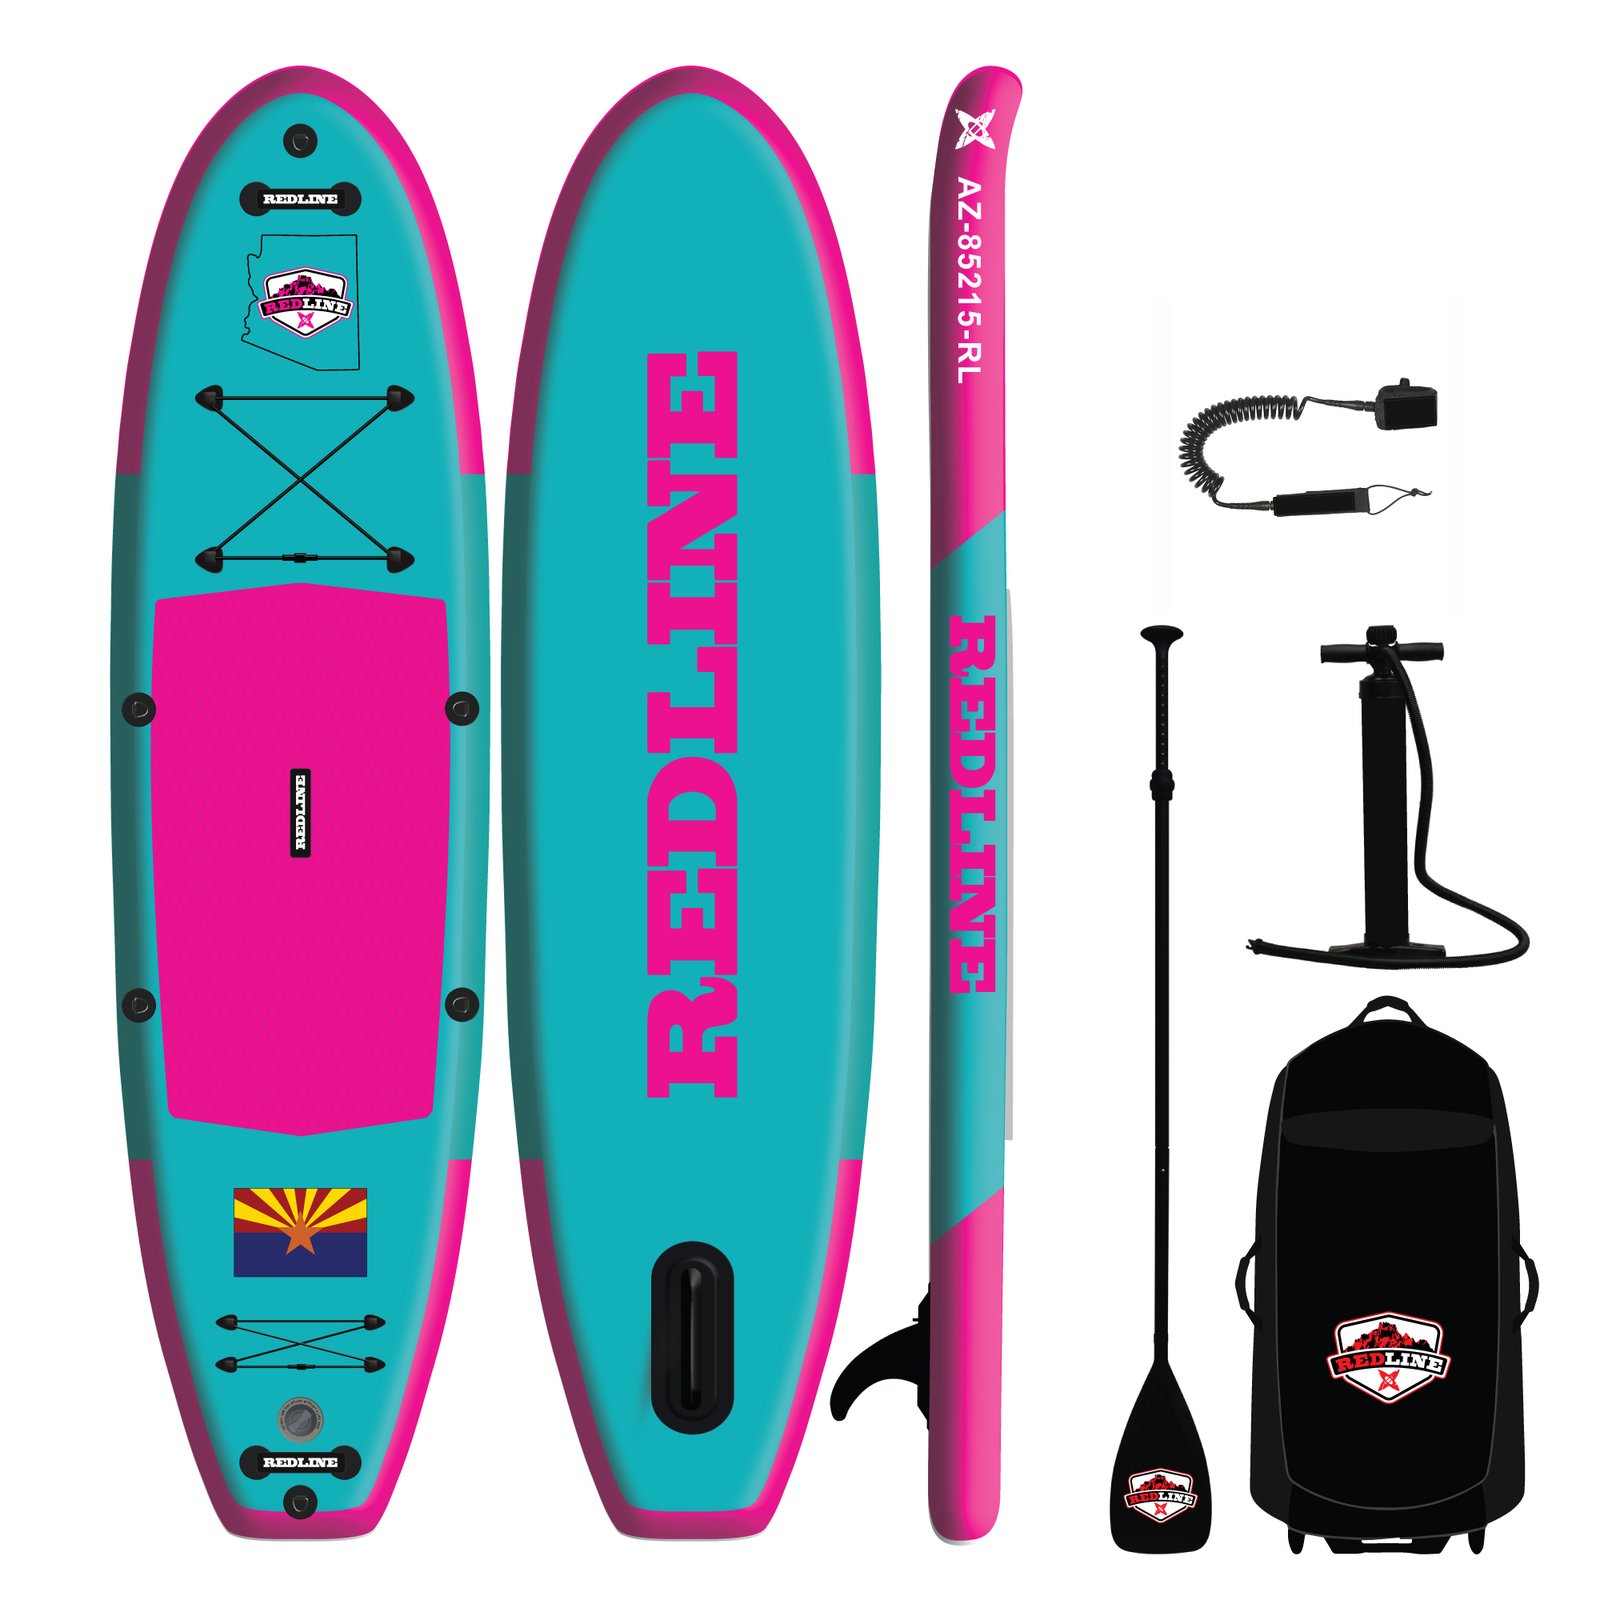 10' and 11' Inflatable Redline Paddleboards - Kayak and Paddle Board ...